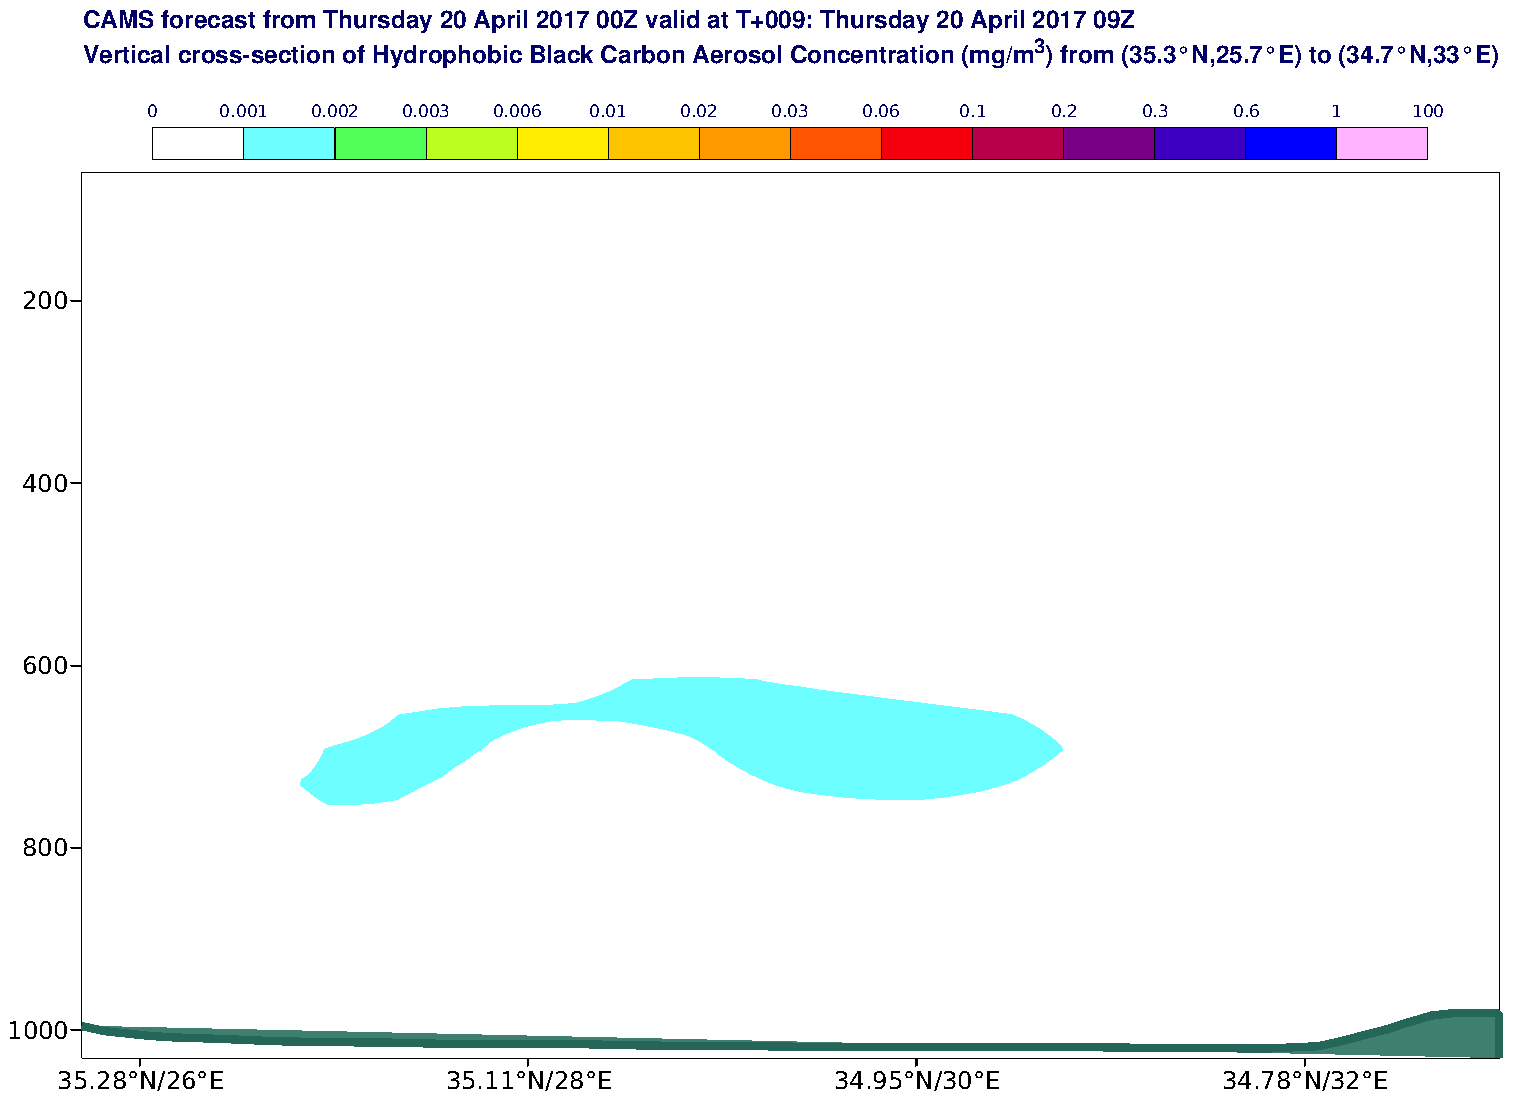 Vertical cross-section of Hydrophobic Black Carbon Aerosol Concentration (mg/m3) valid at T9 - 2017-04-20 09:00